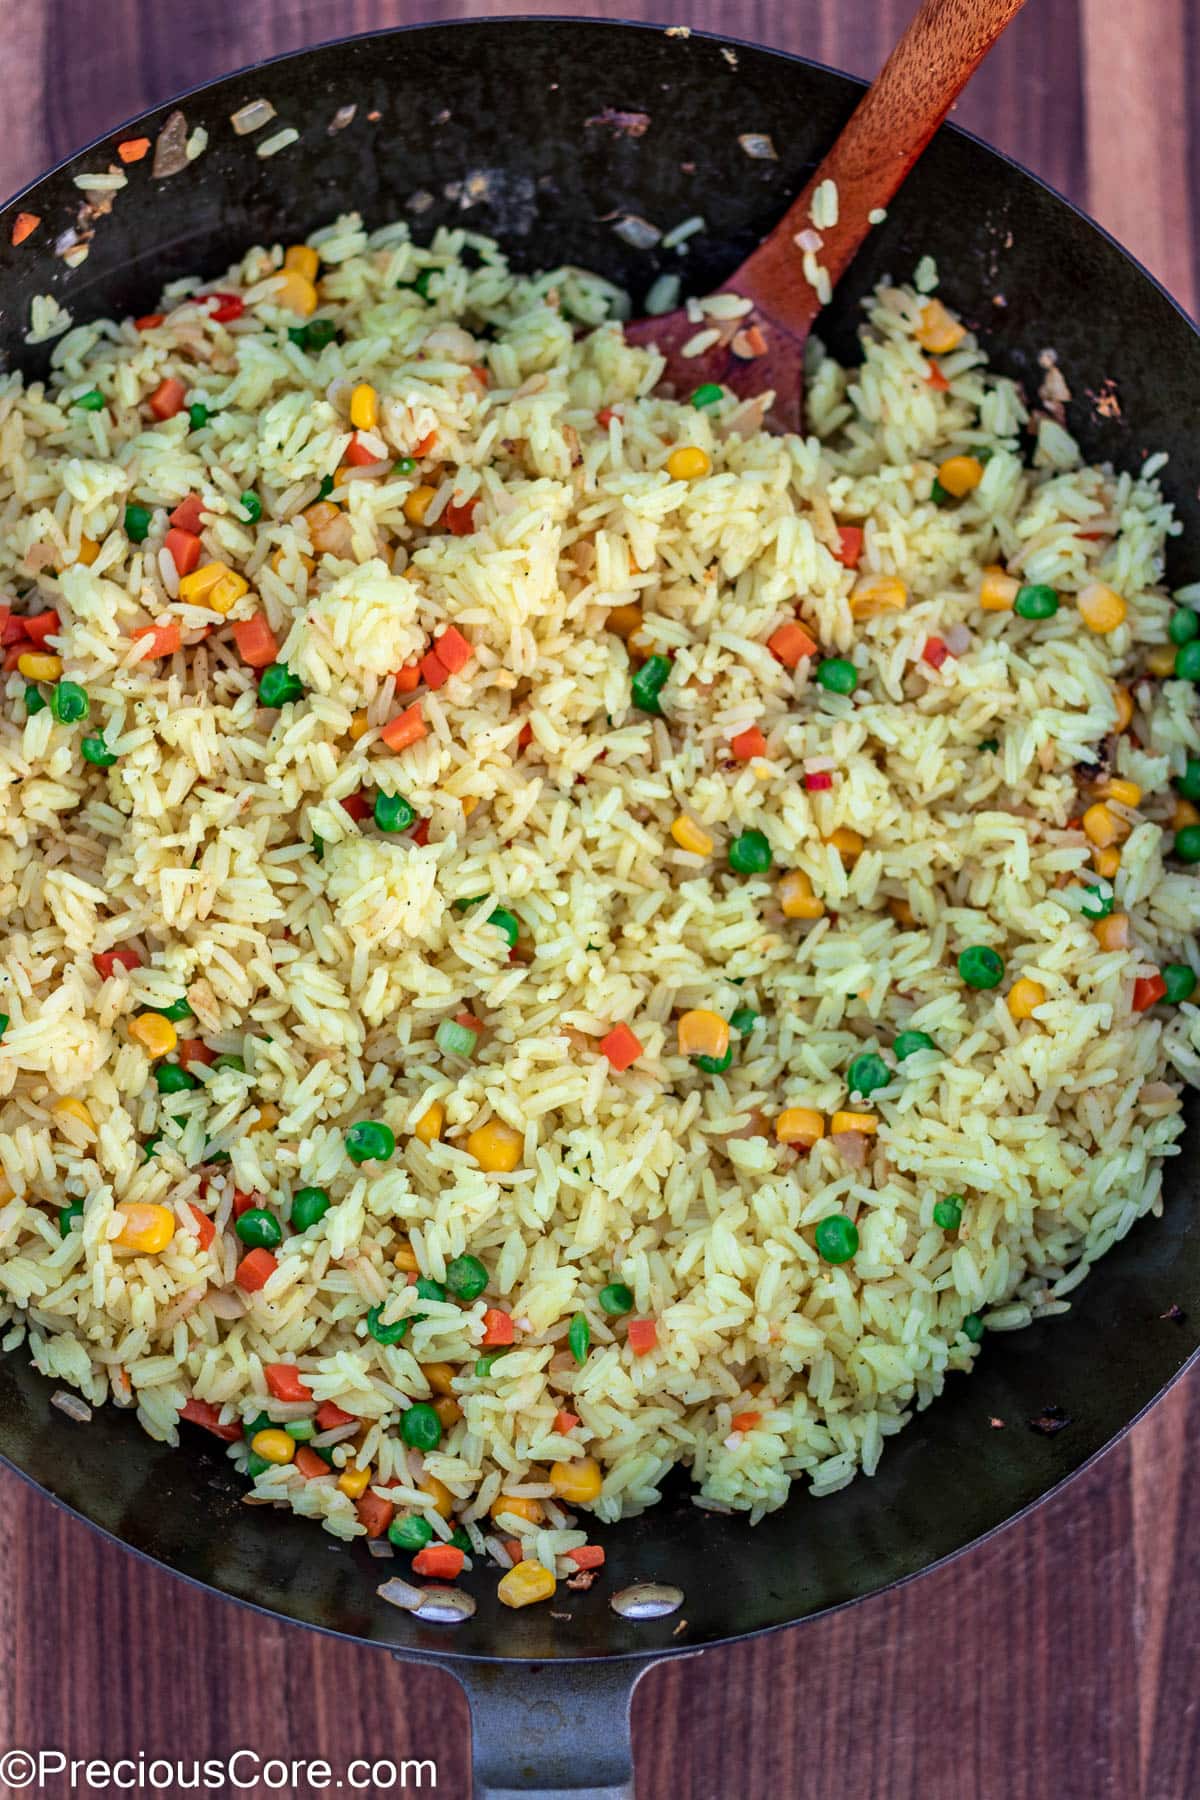 Rice stir-fried with vegetables in a wok.